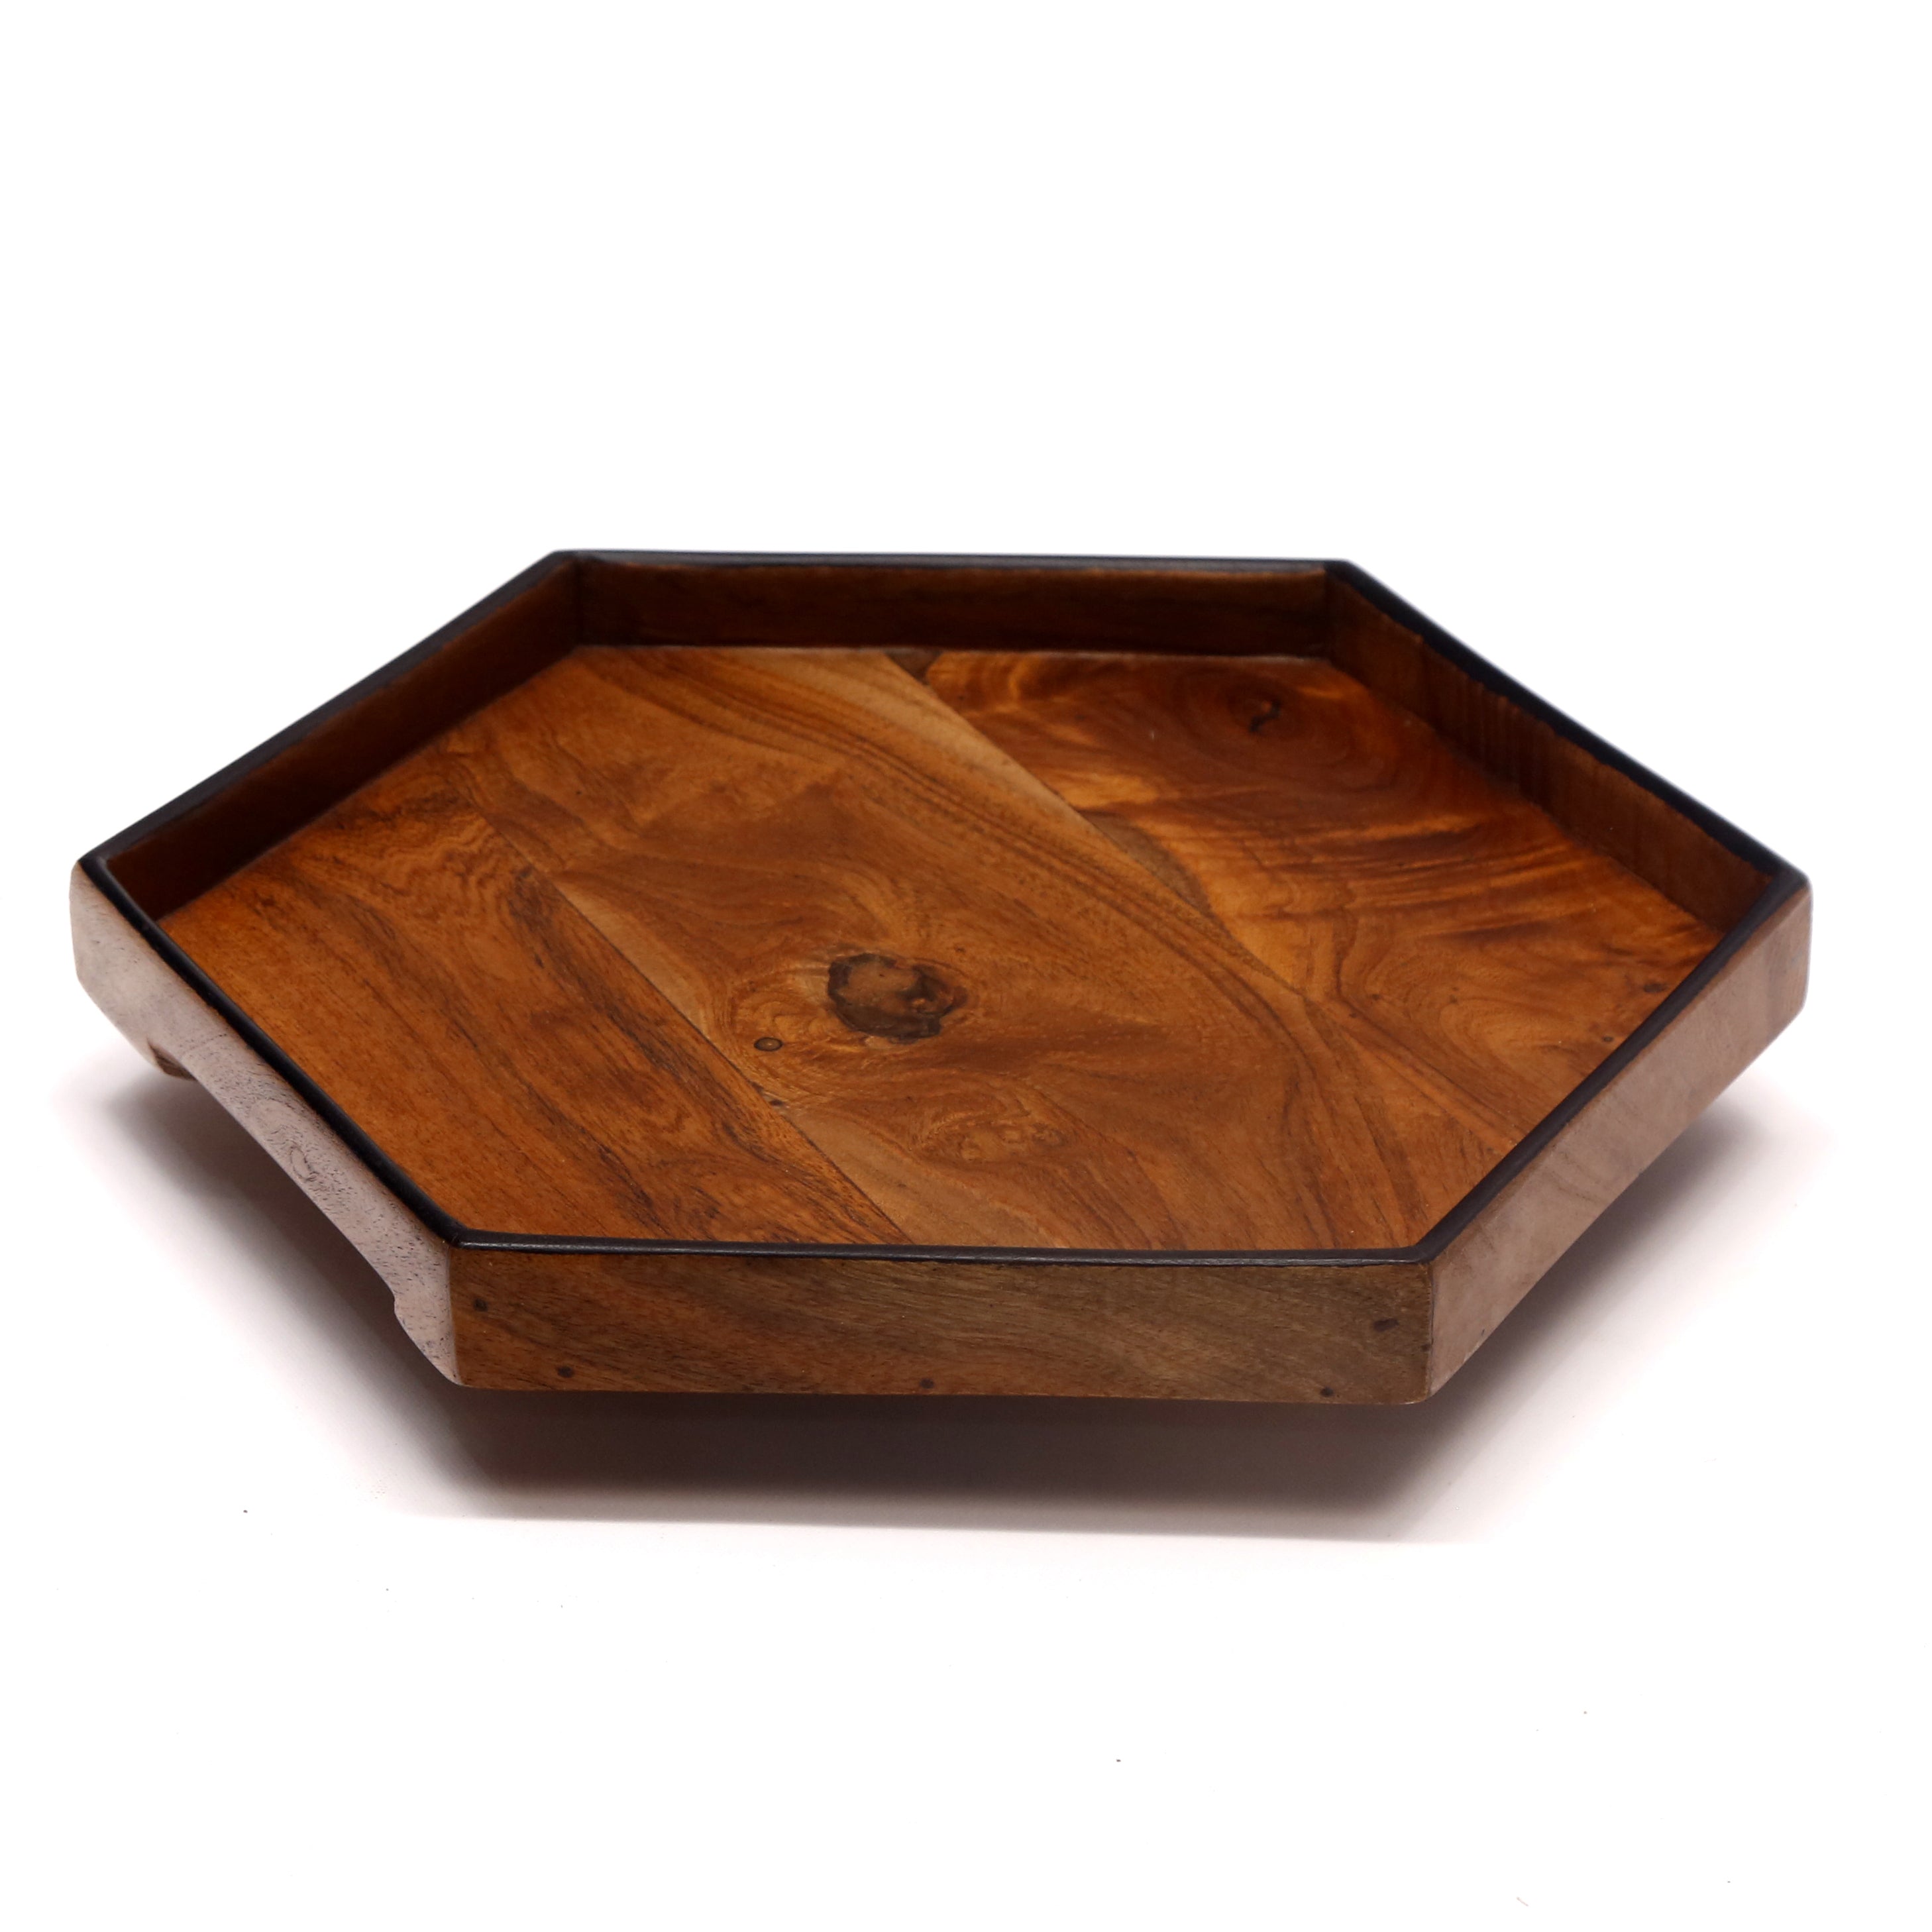 Abstract Shaped Wooden Platter Tray